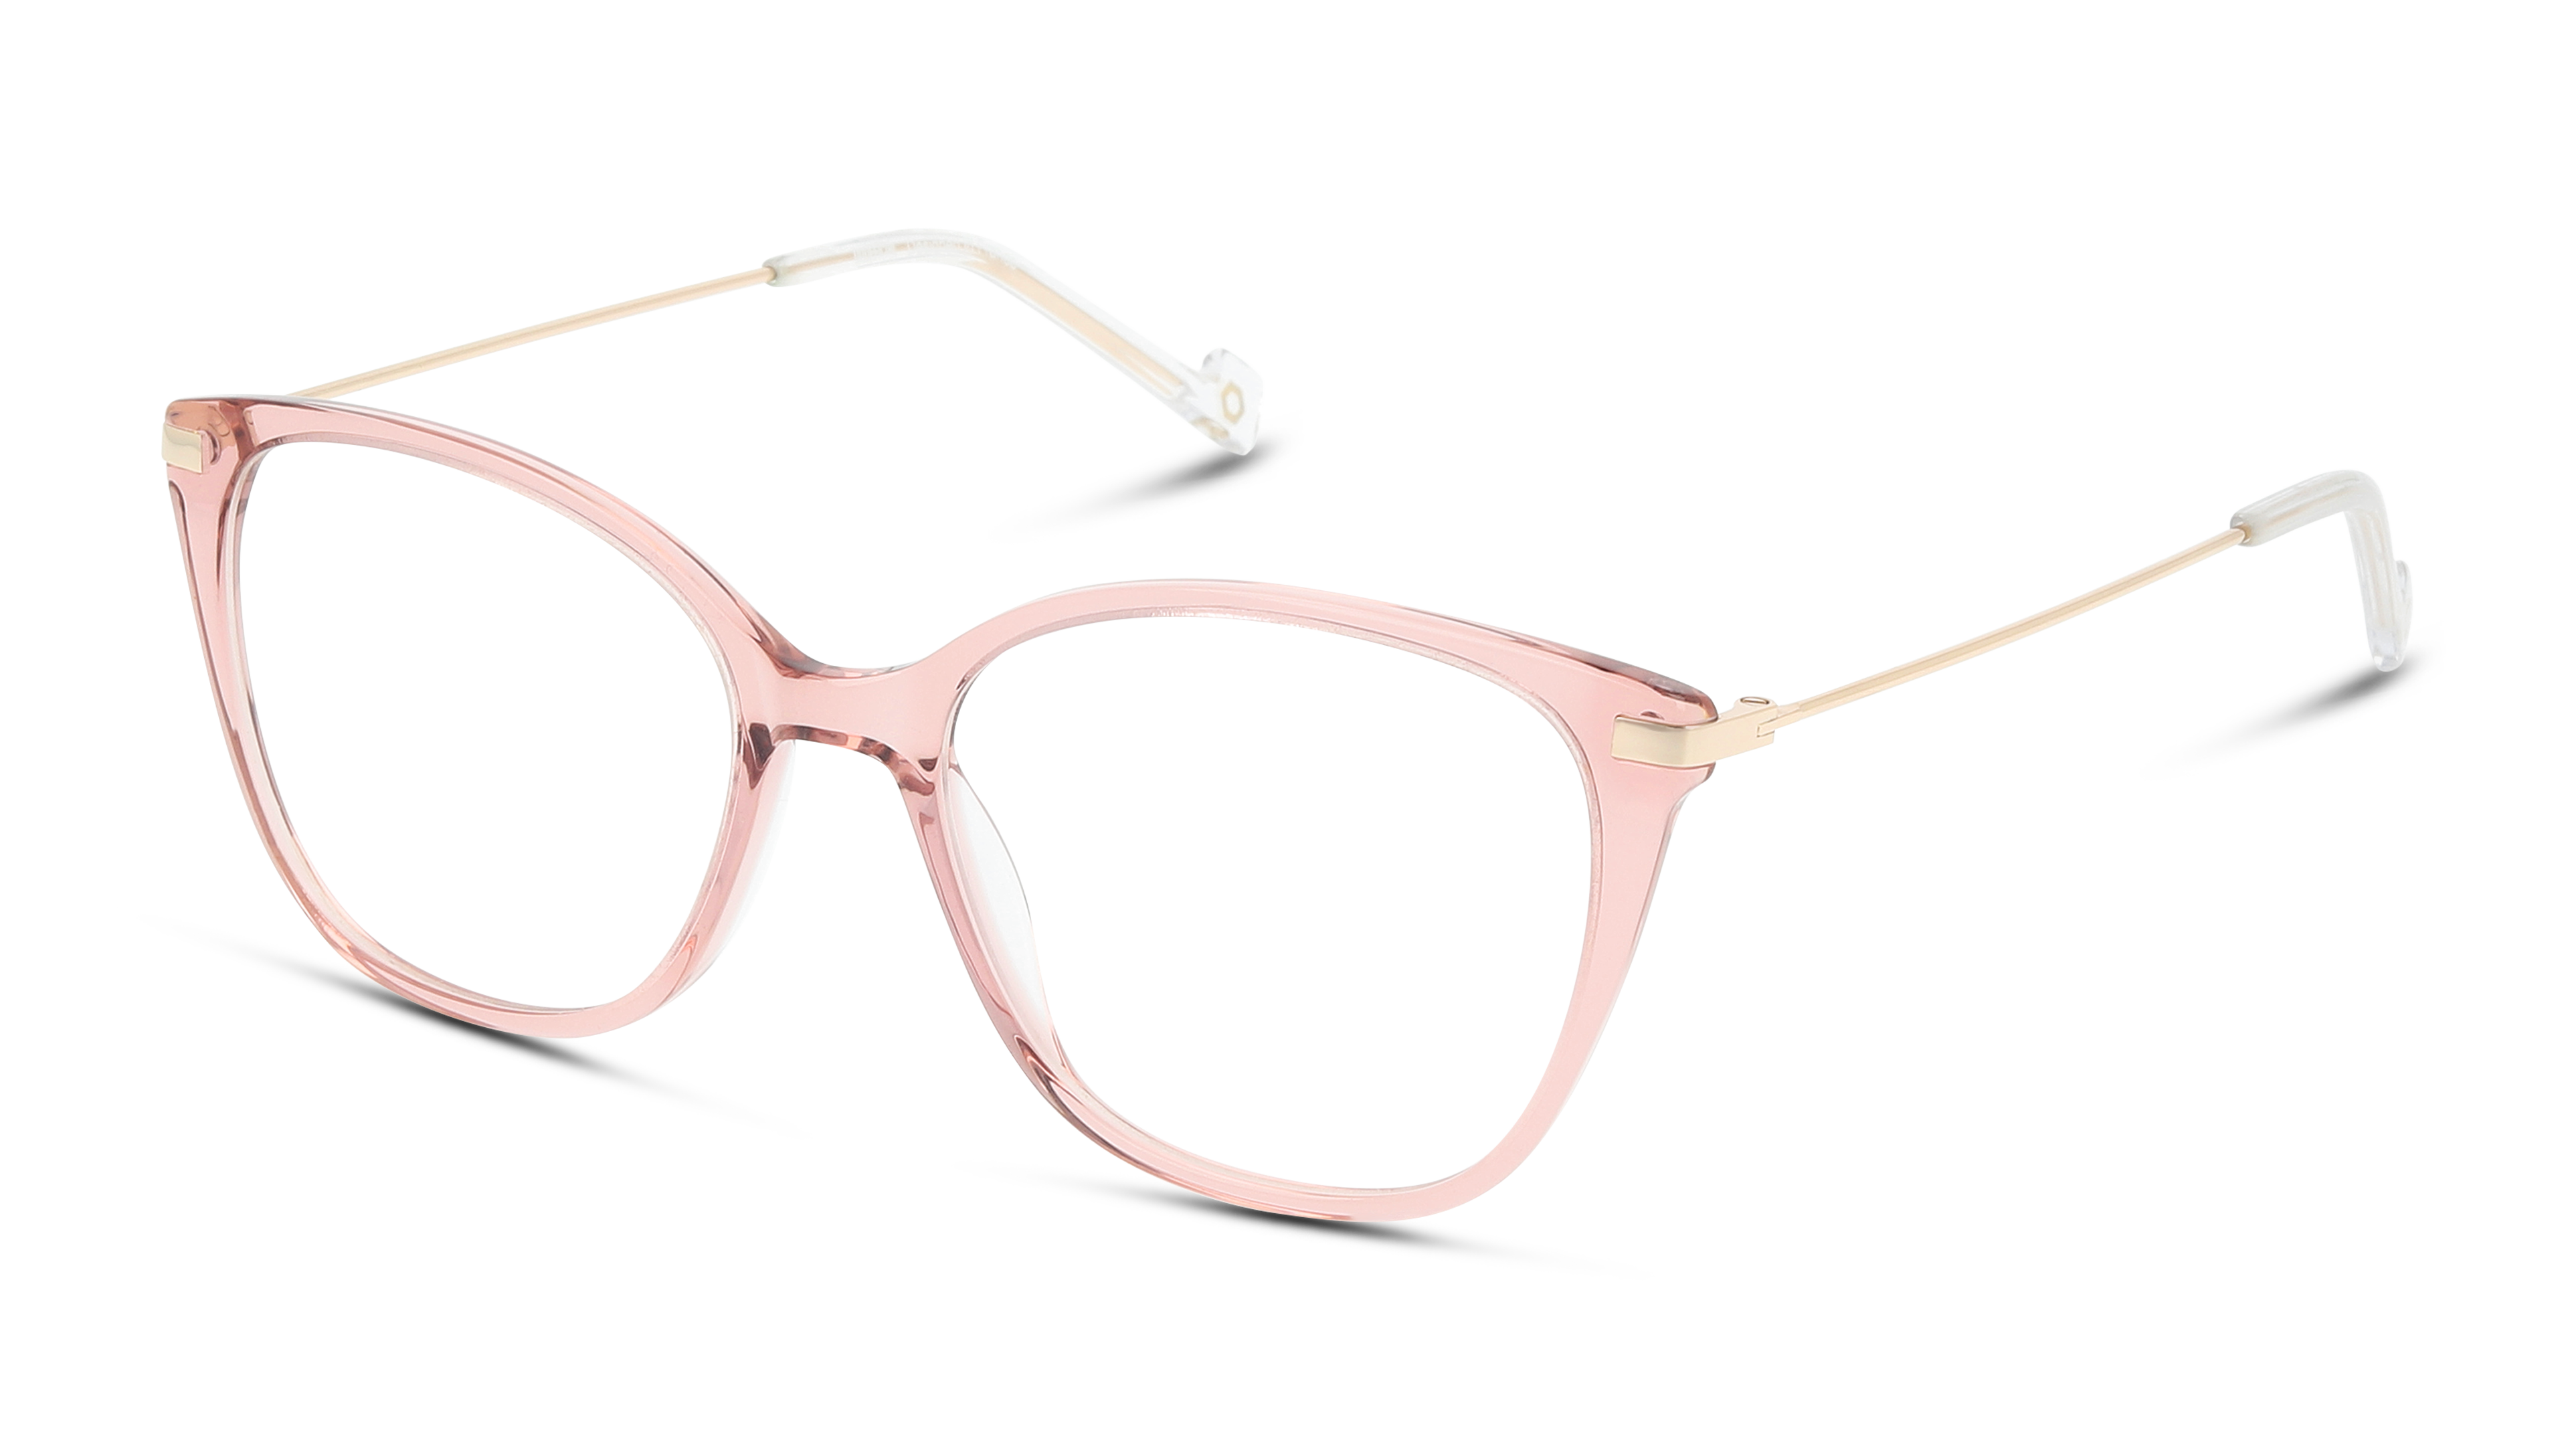 Angle_Left01 Unofficial UNOF0072 (PD00) Glasses Transparent / Pink